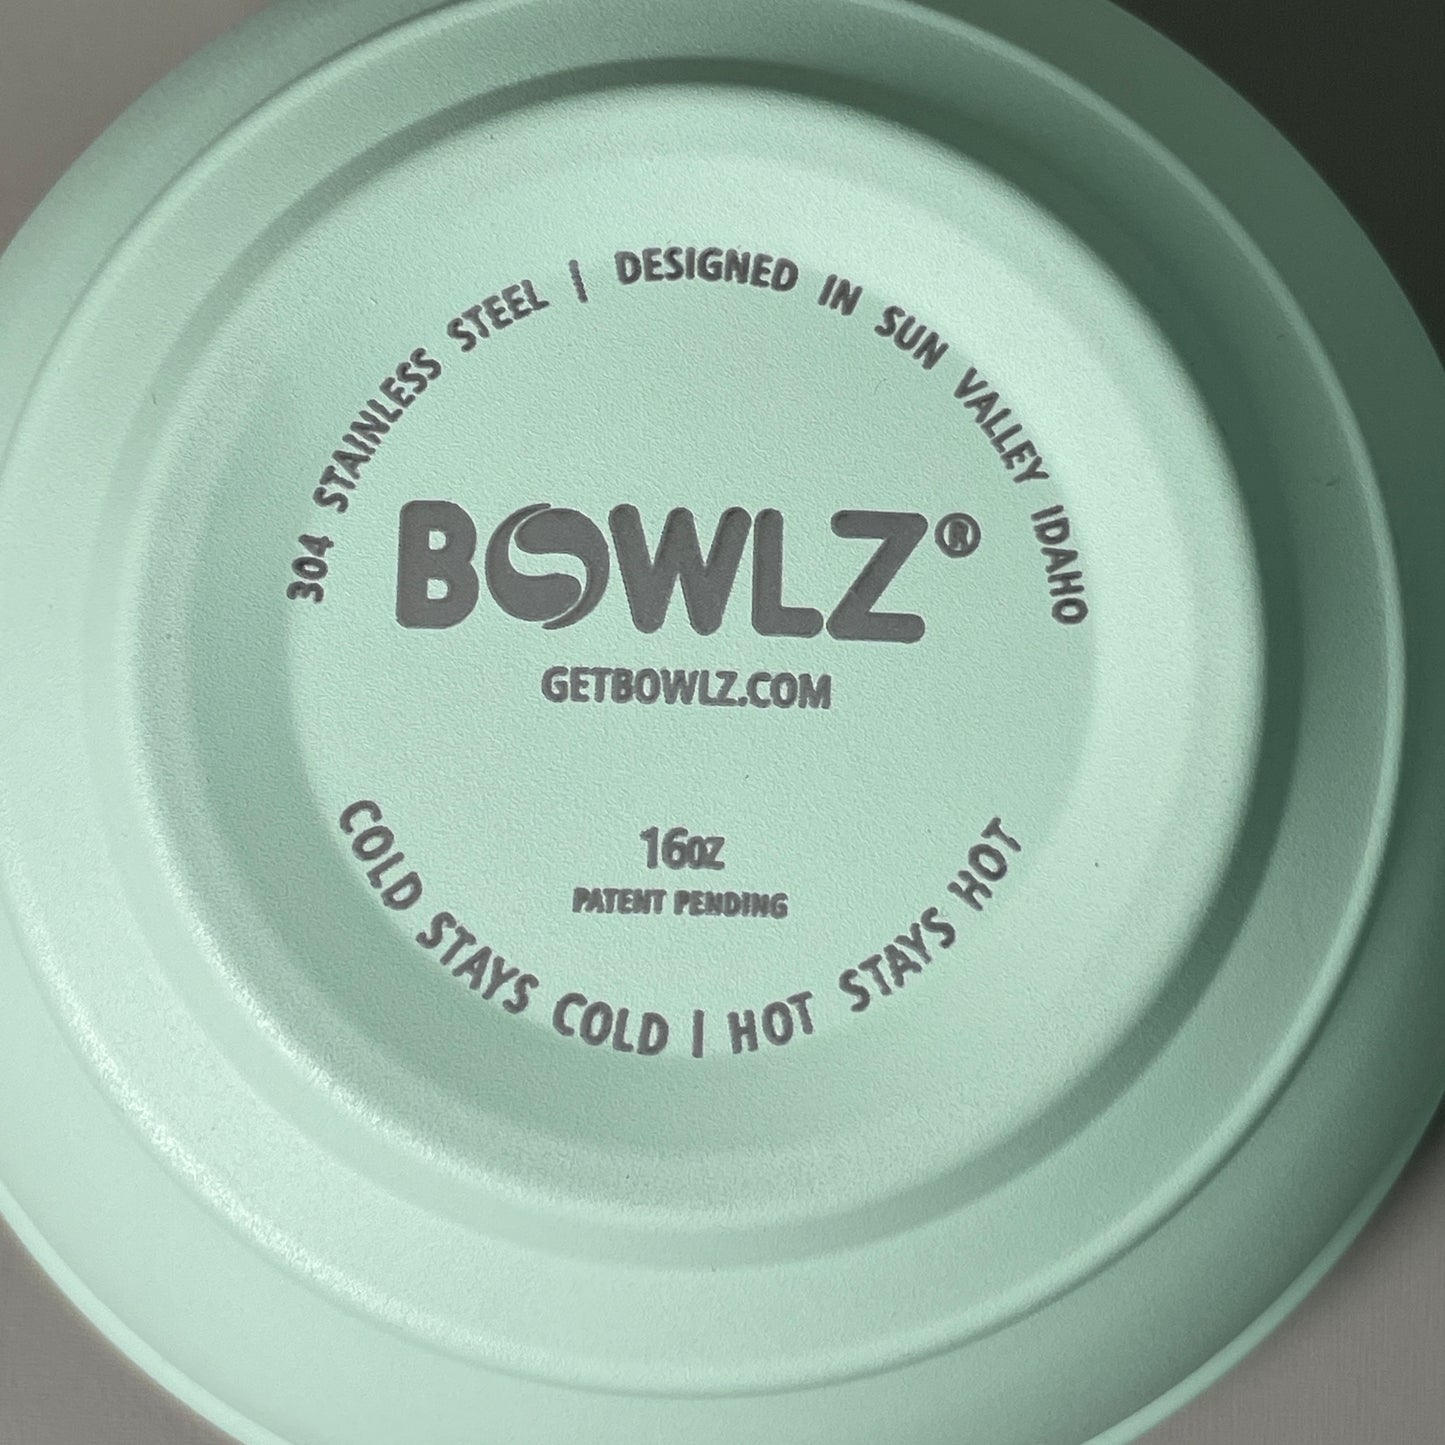 BOWLZ Stainless Steel Insulated Bowl 16 oz Mint (New)